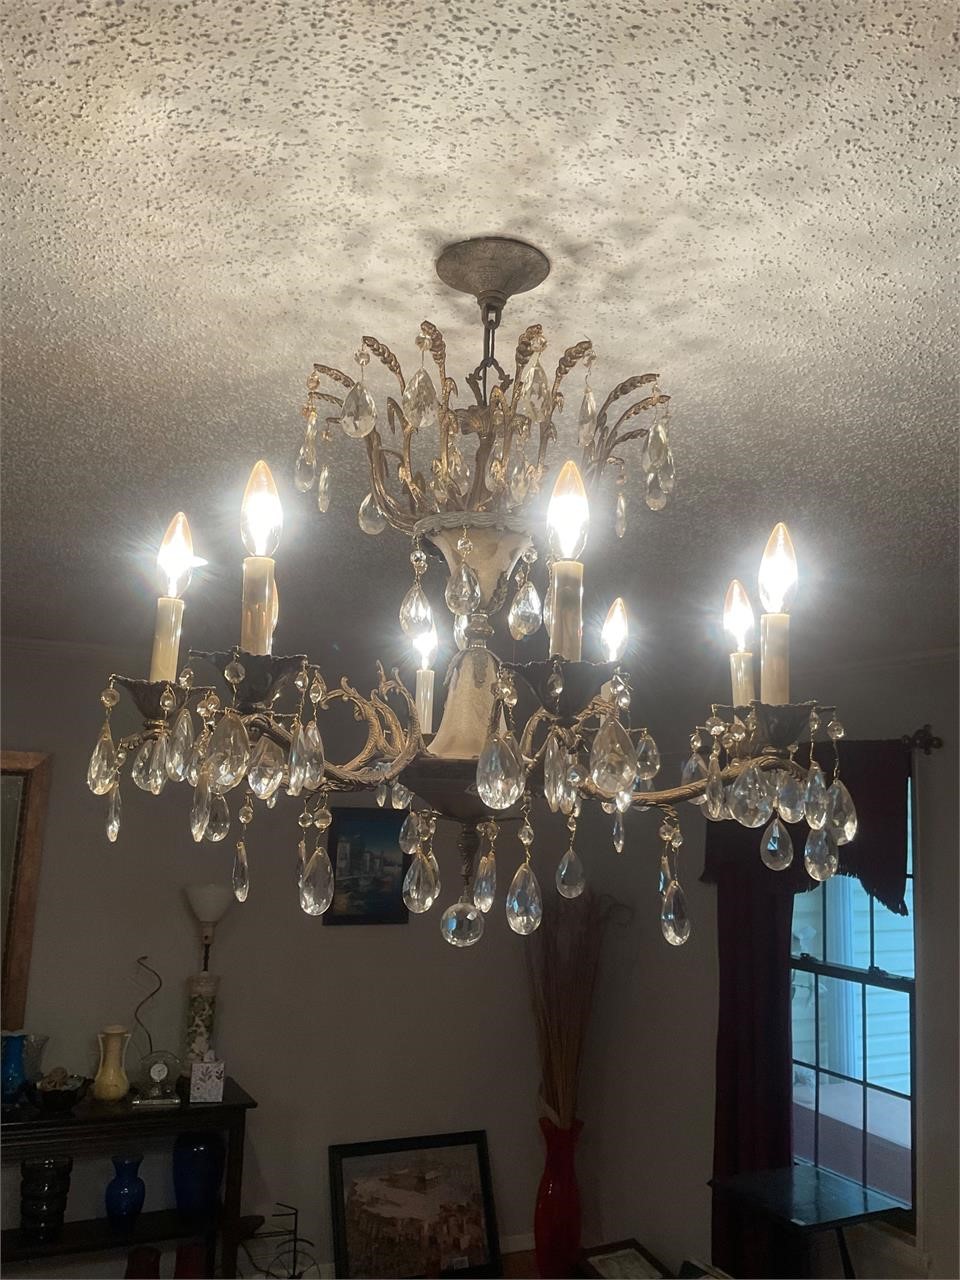 BEAUTIFUL chandelier with GLASS dangles